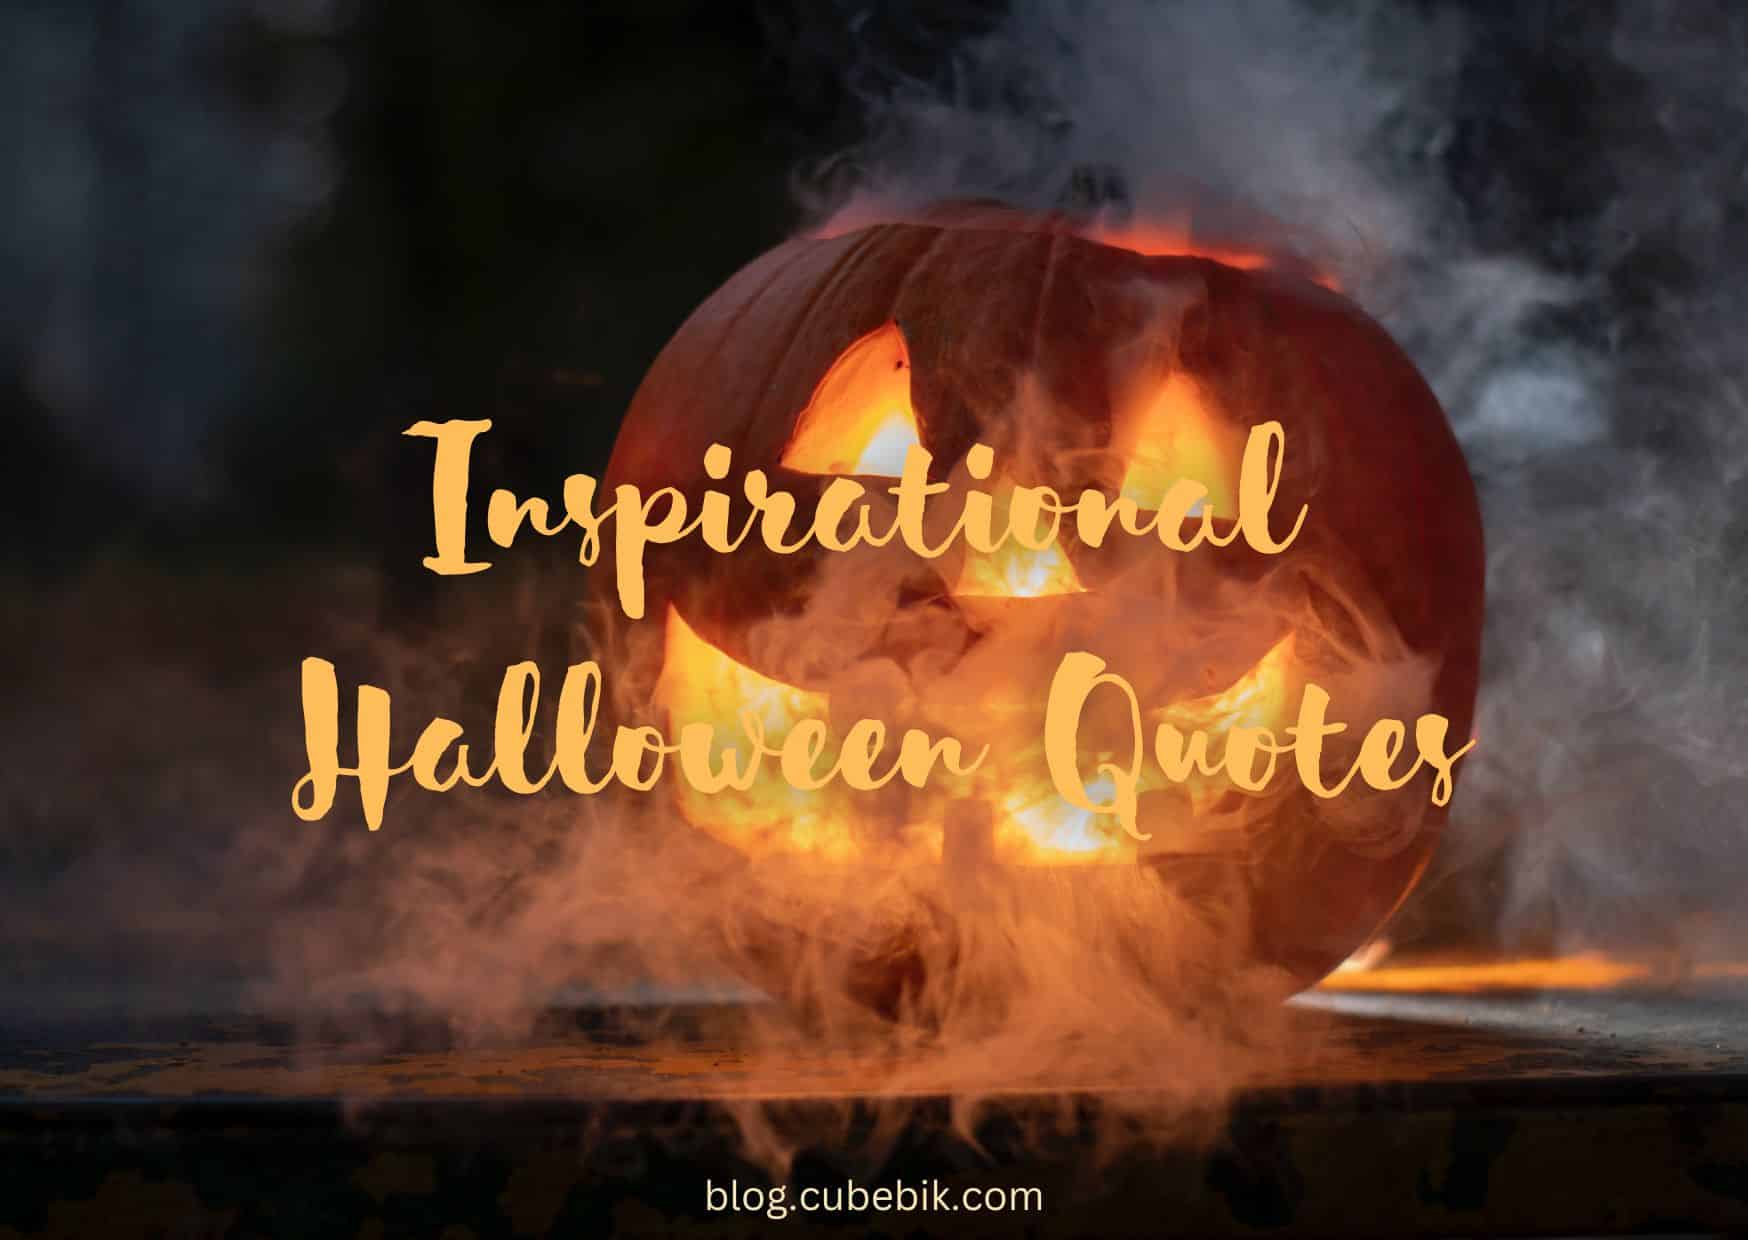 Inspirational Halloween Quotes To Ignite Imagination